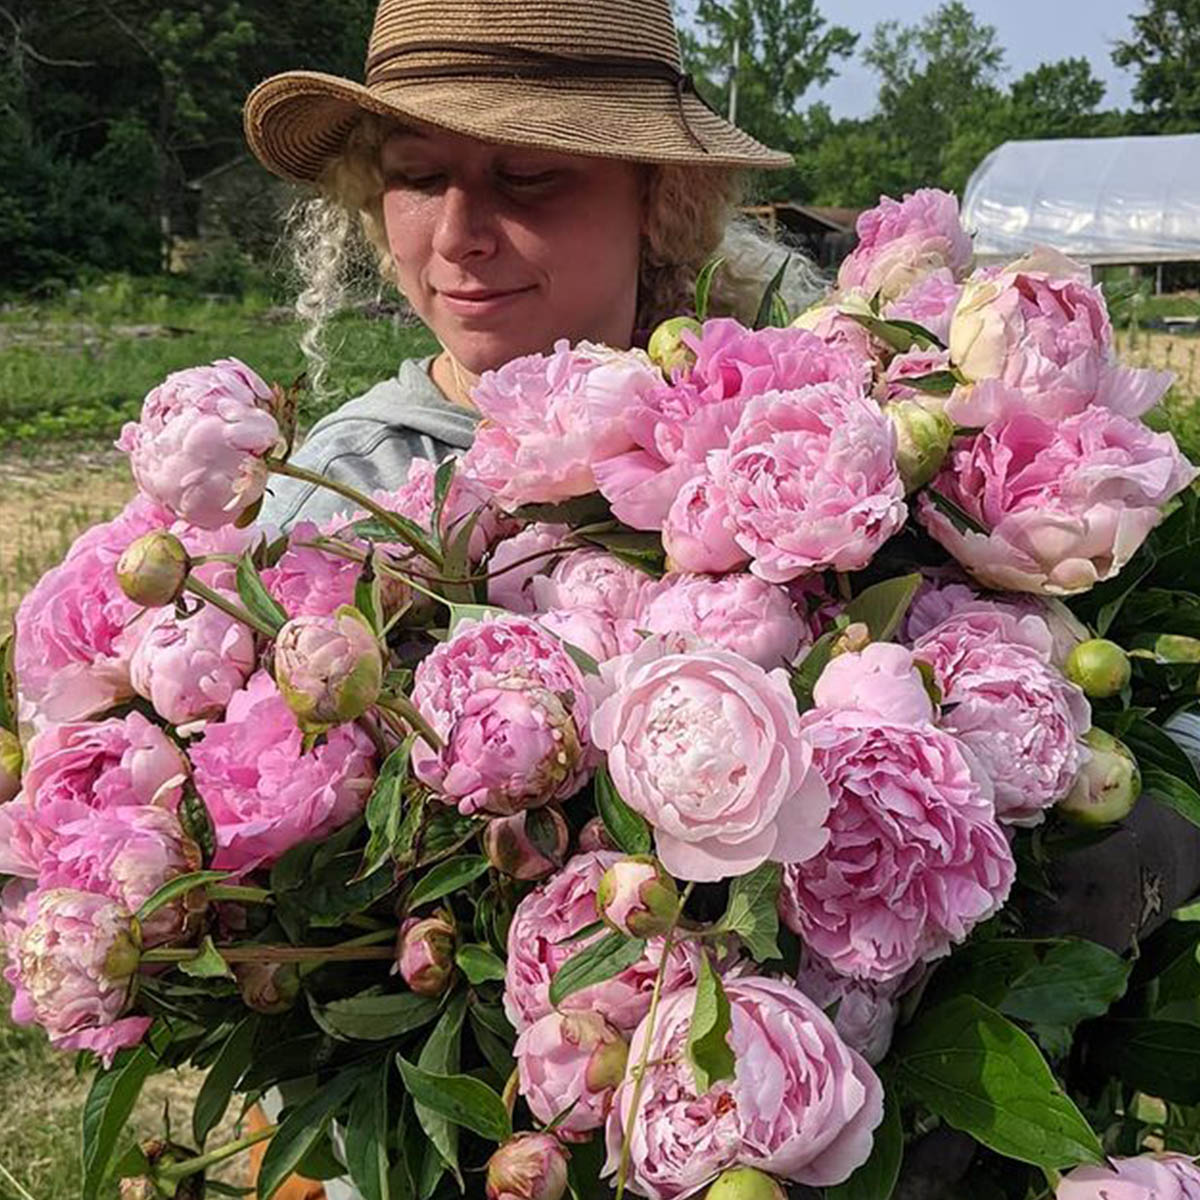 local-farmer-florists-are-blooming-featured